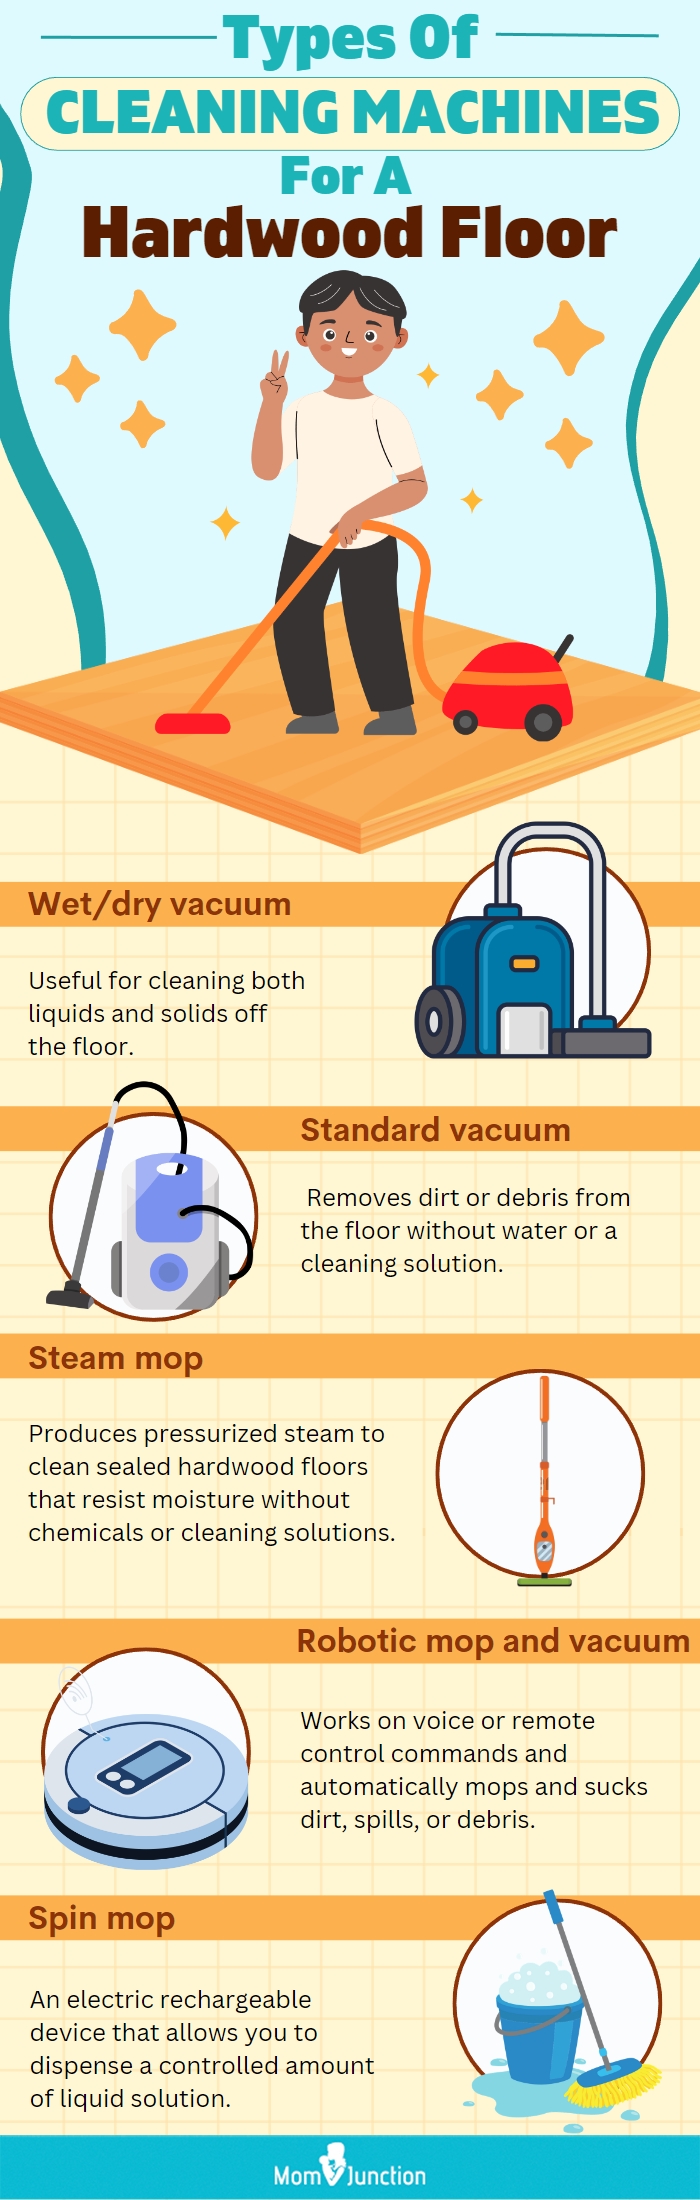 Types Of Cleaning Machines For A Hardwood Floor (infographic)